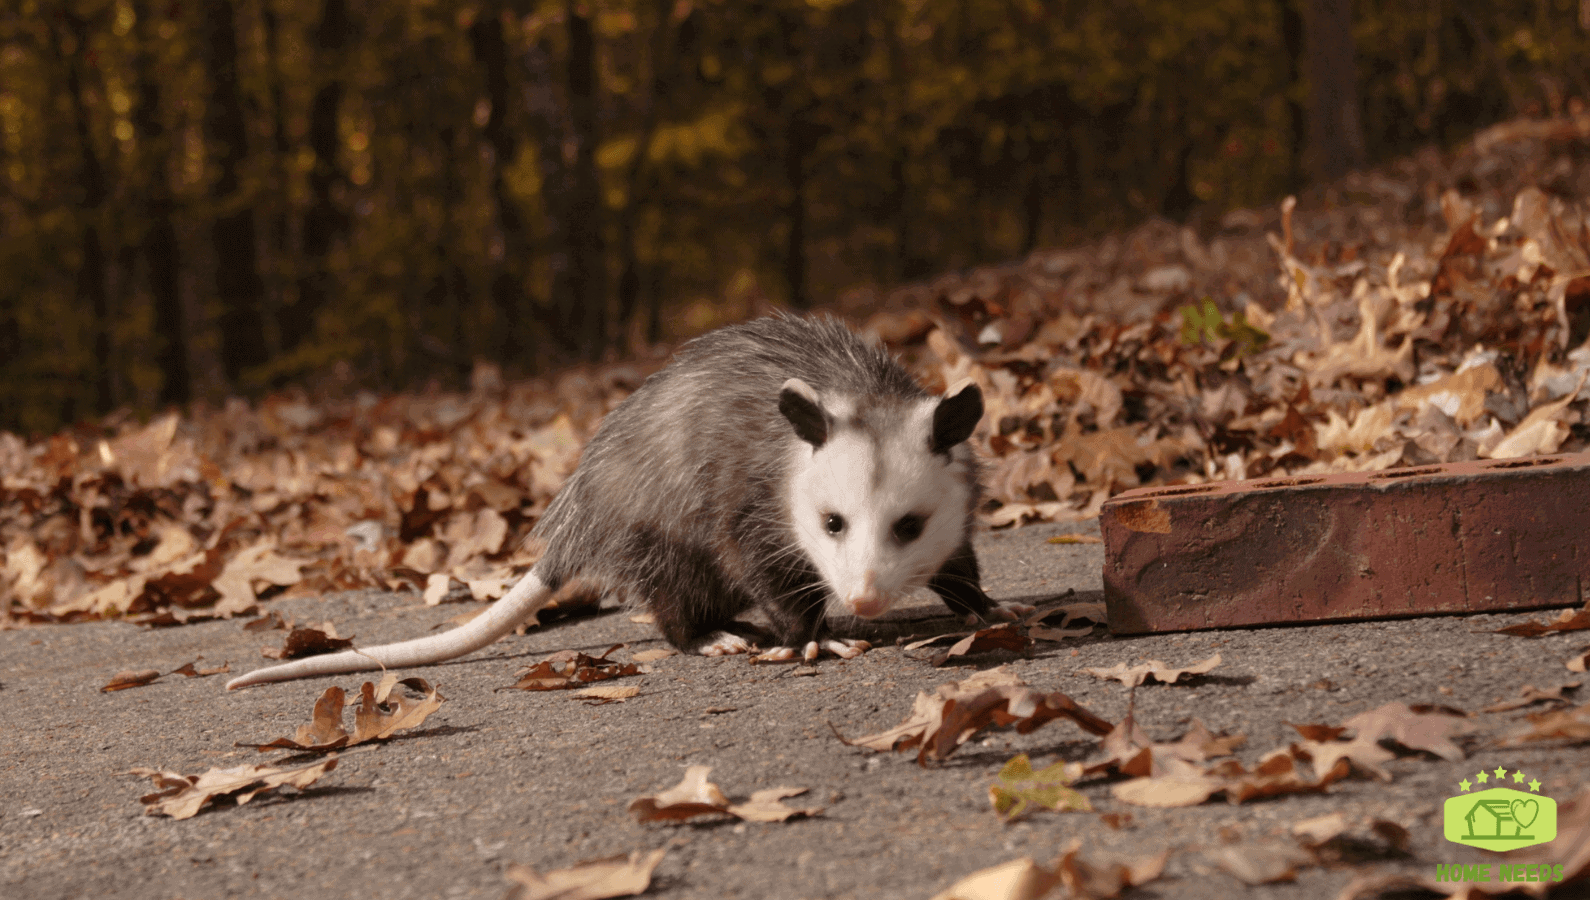 How To Get Rid of Possums In Your Backyard